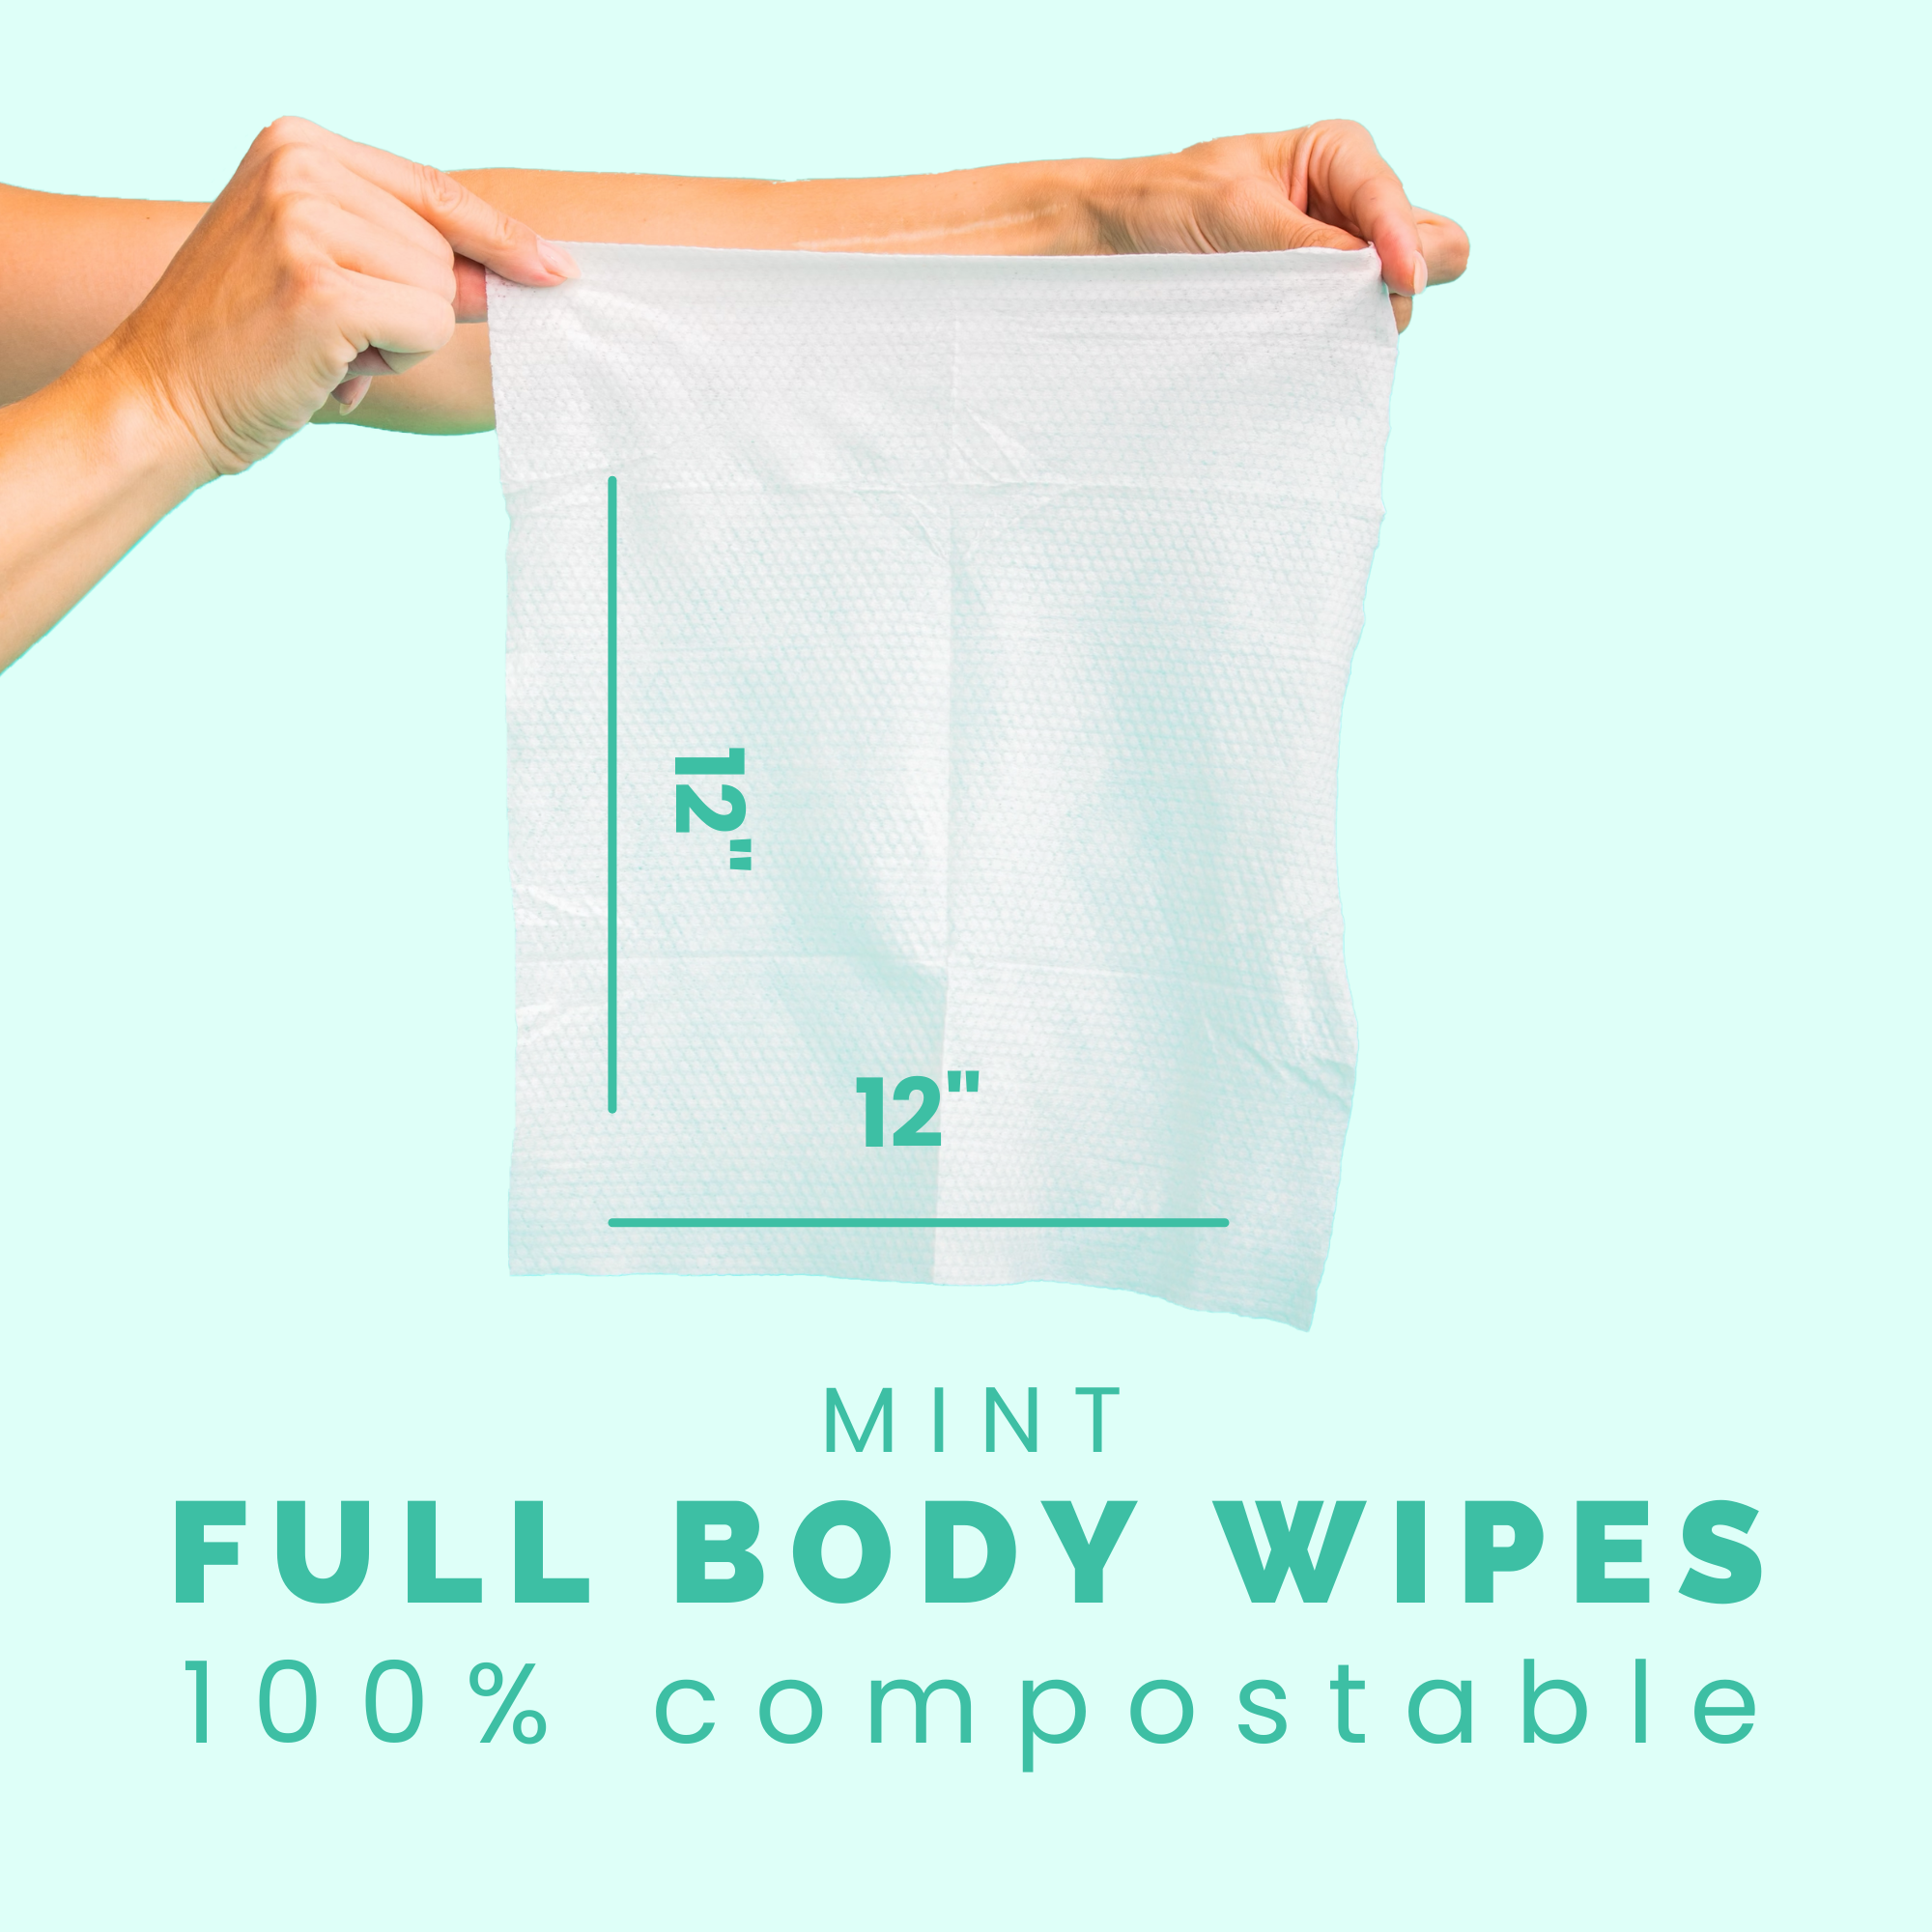 HyperGo Full Body Wipes are 12 inches square and fully compostable.